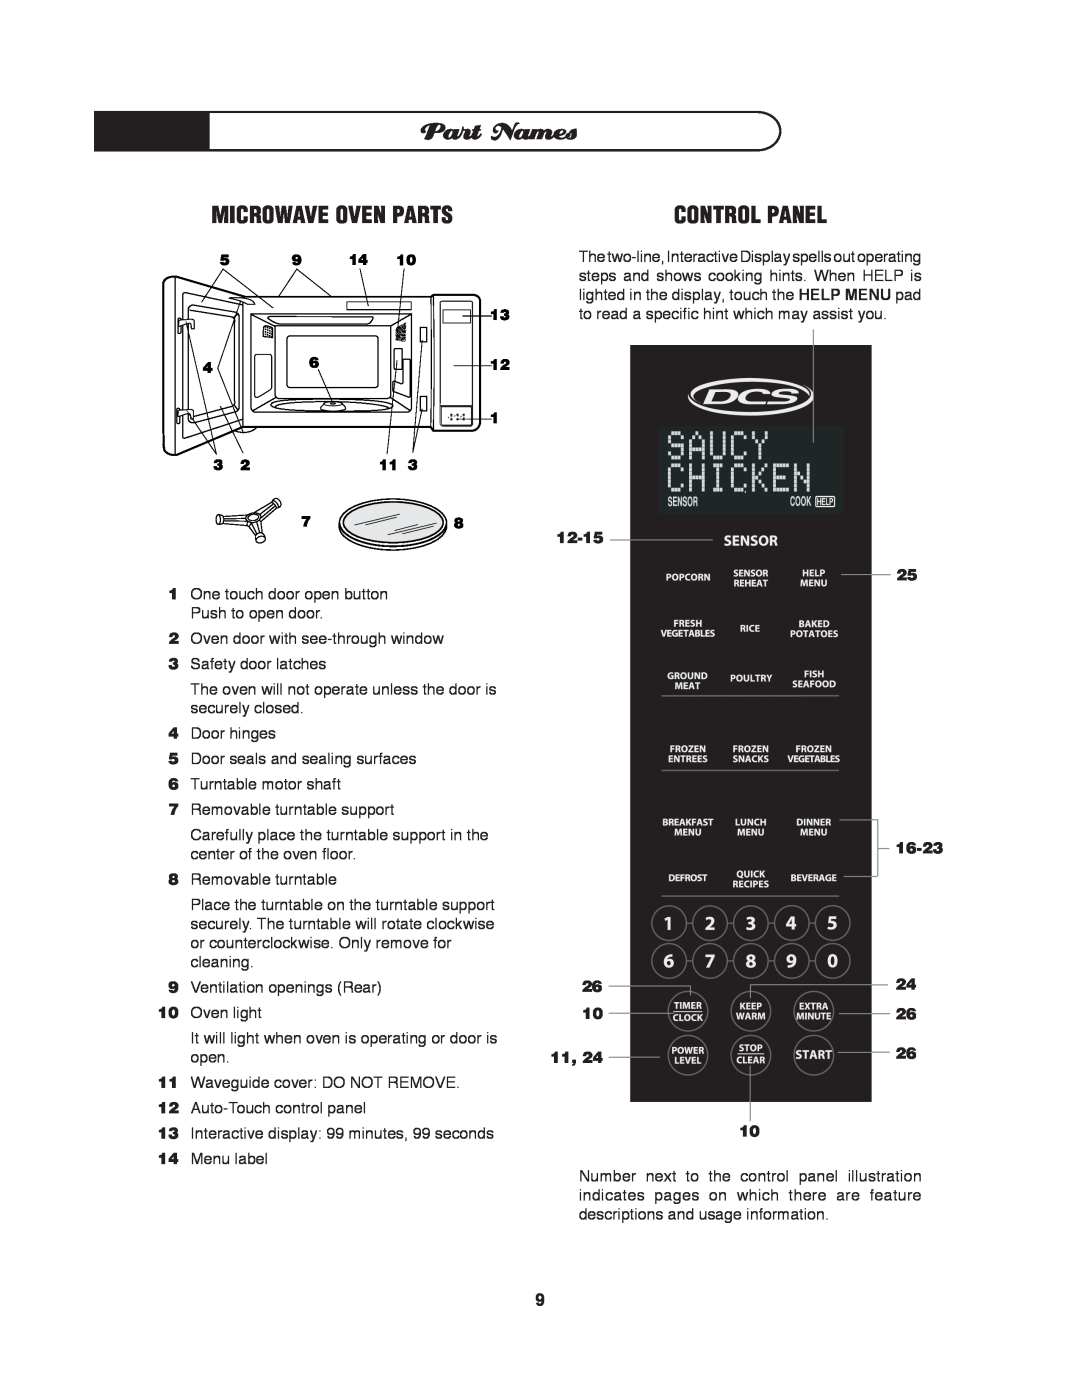 DCS MO-24SS manual Part Names, Microwave Oven Parts 